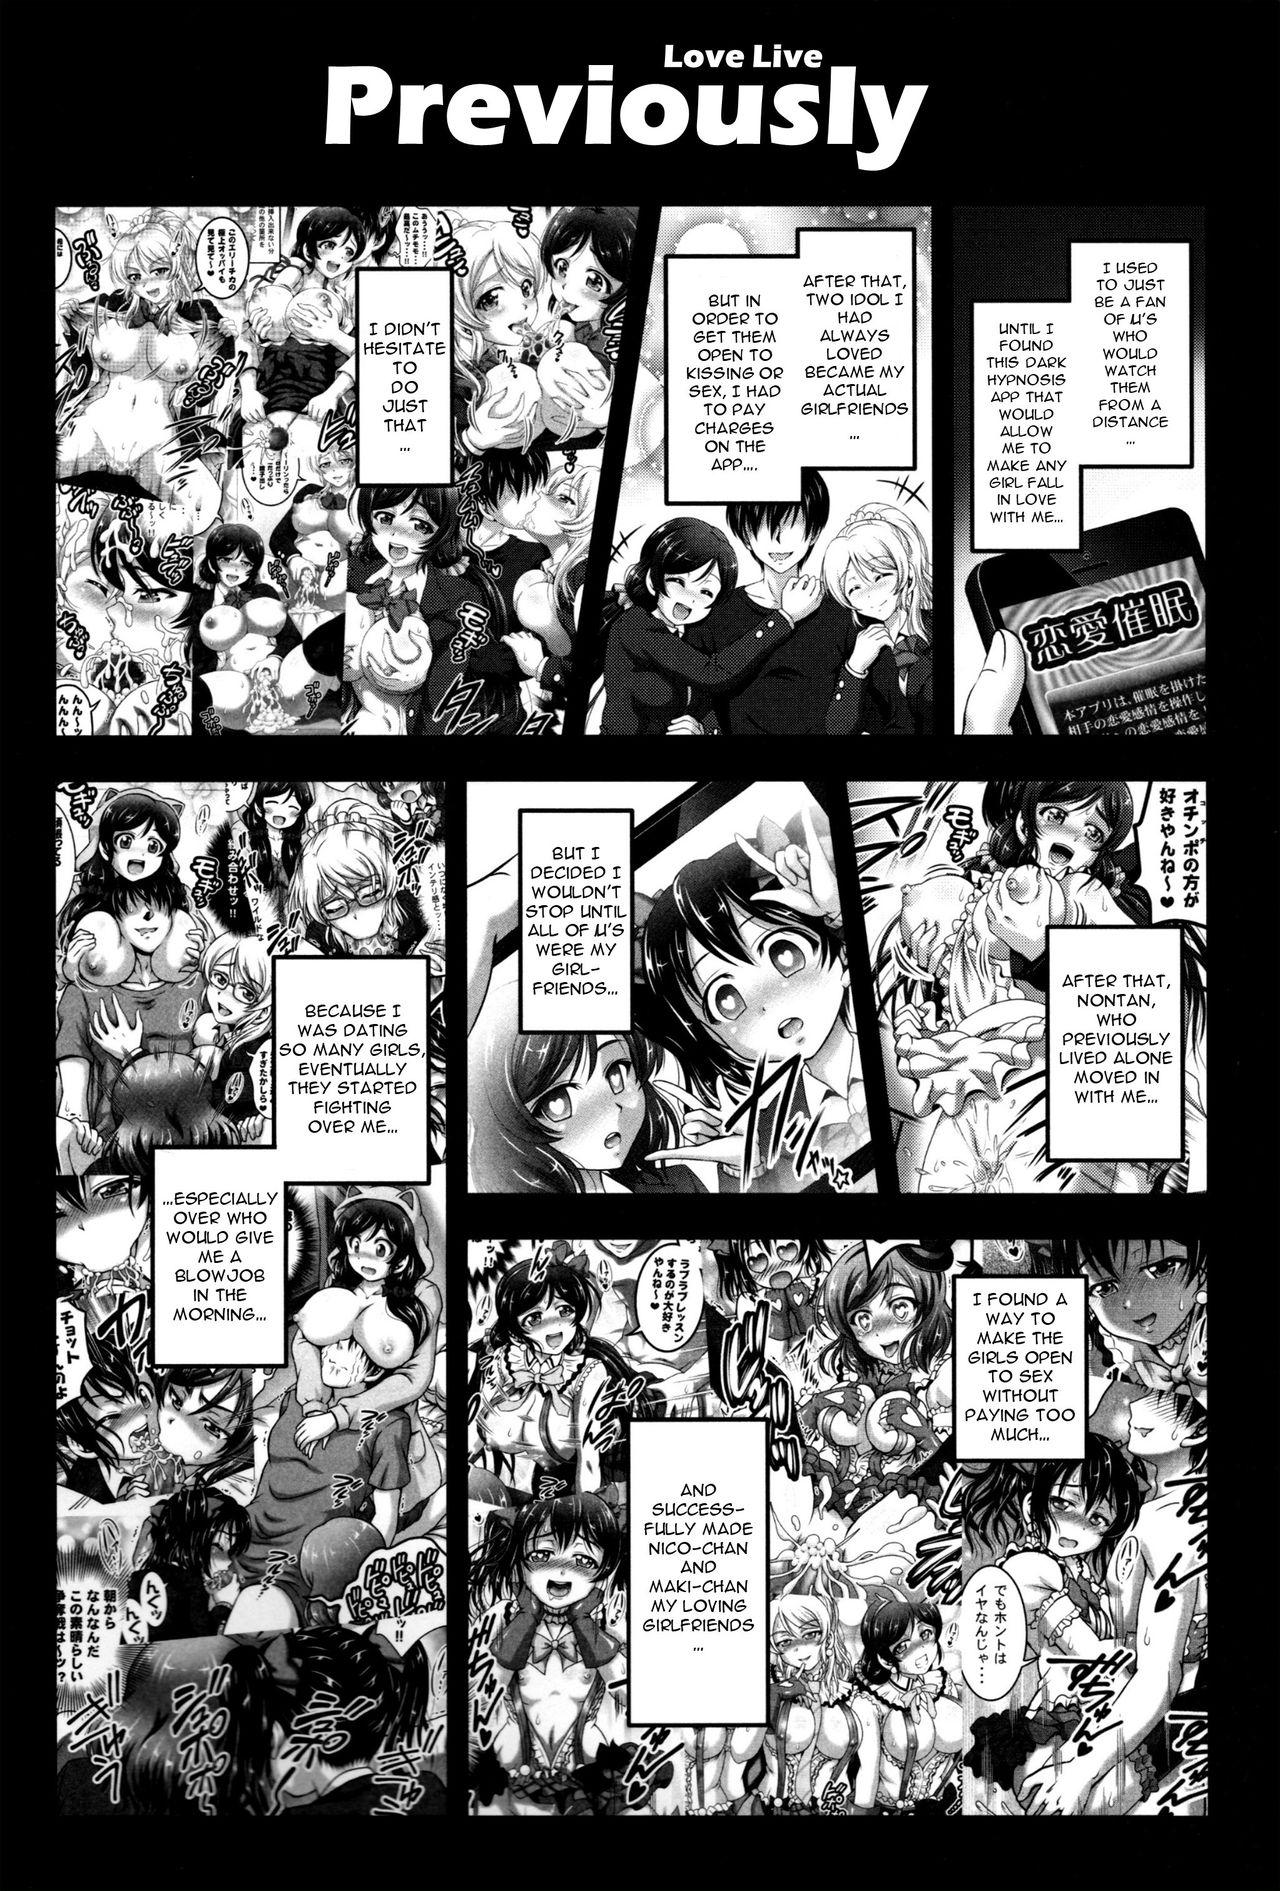 Cousin Ore Yome Saimin 6 - Love live Stripping - Page 3